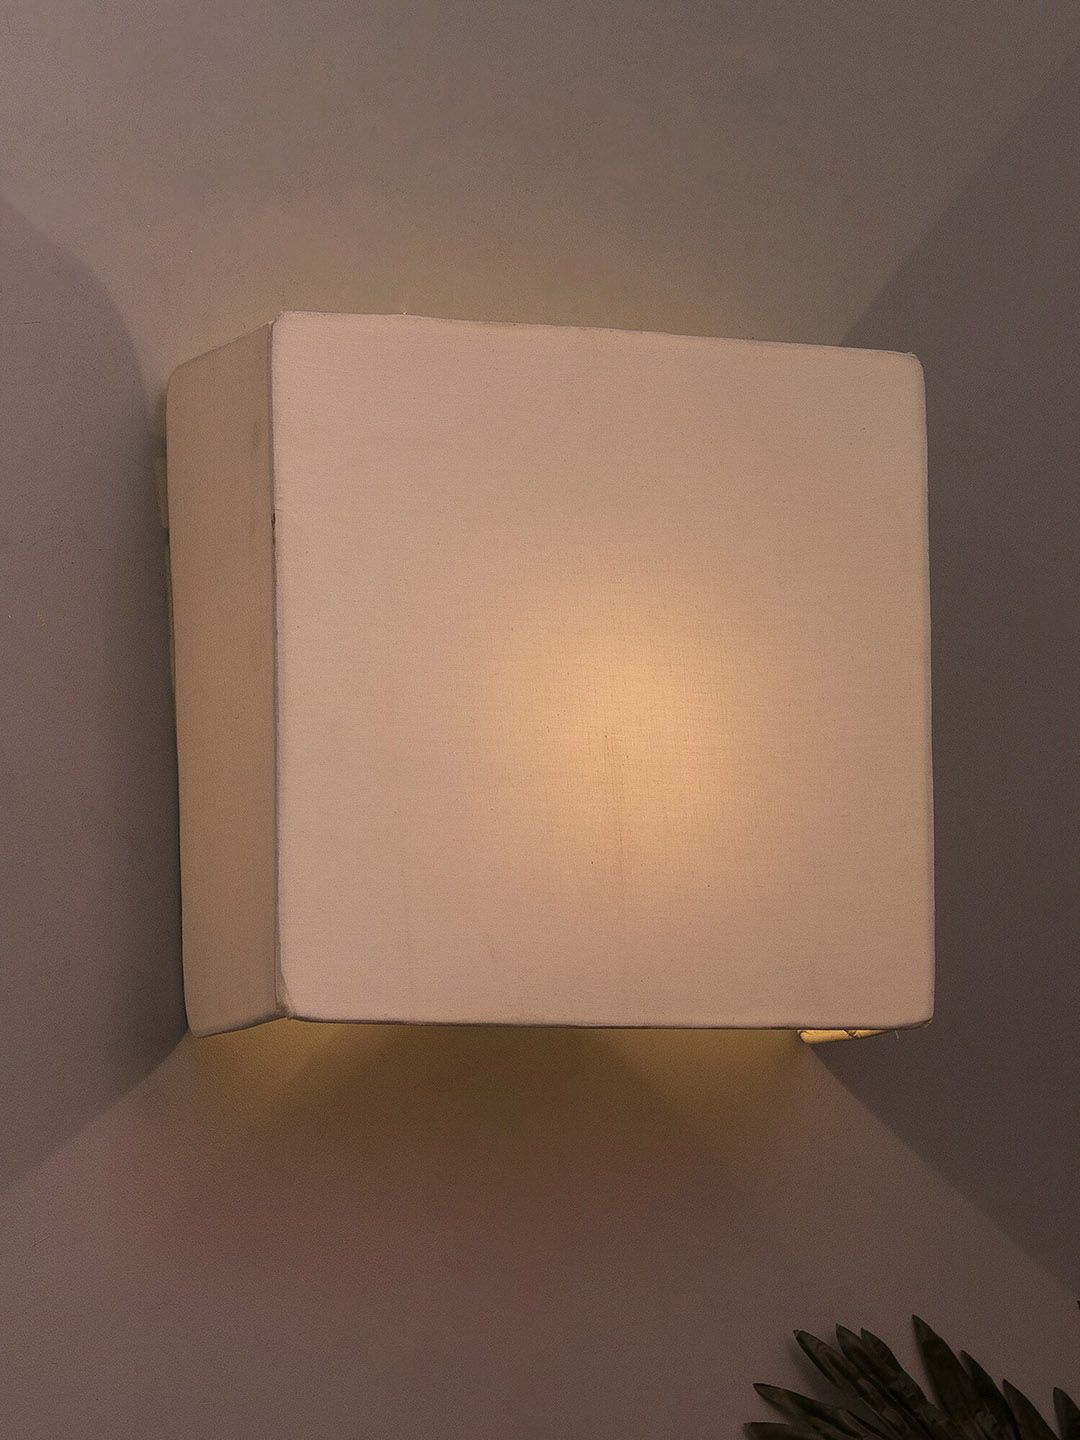 Homesake White Wall Mounted Sconce Shade Lamp Price in India